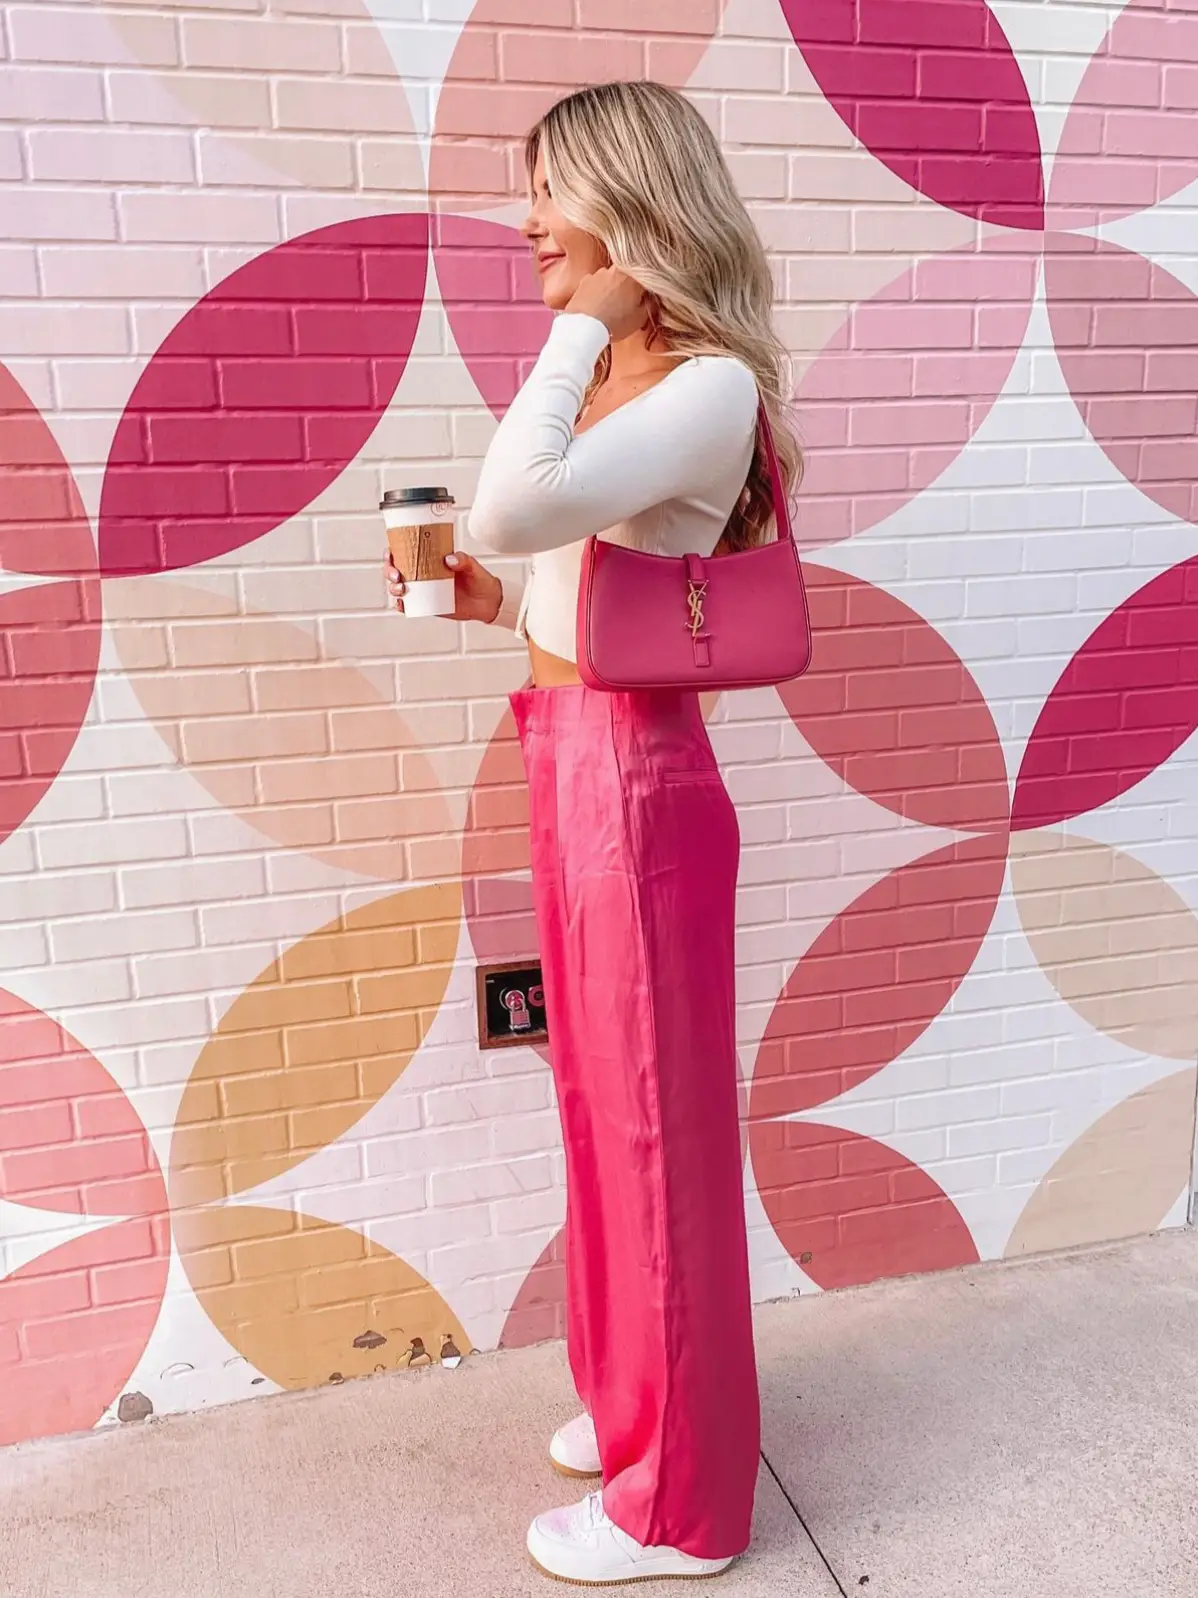 Are you a fan of pink pants 💗?  Gallery posted by Paola Ochoa